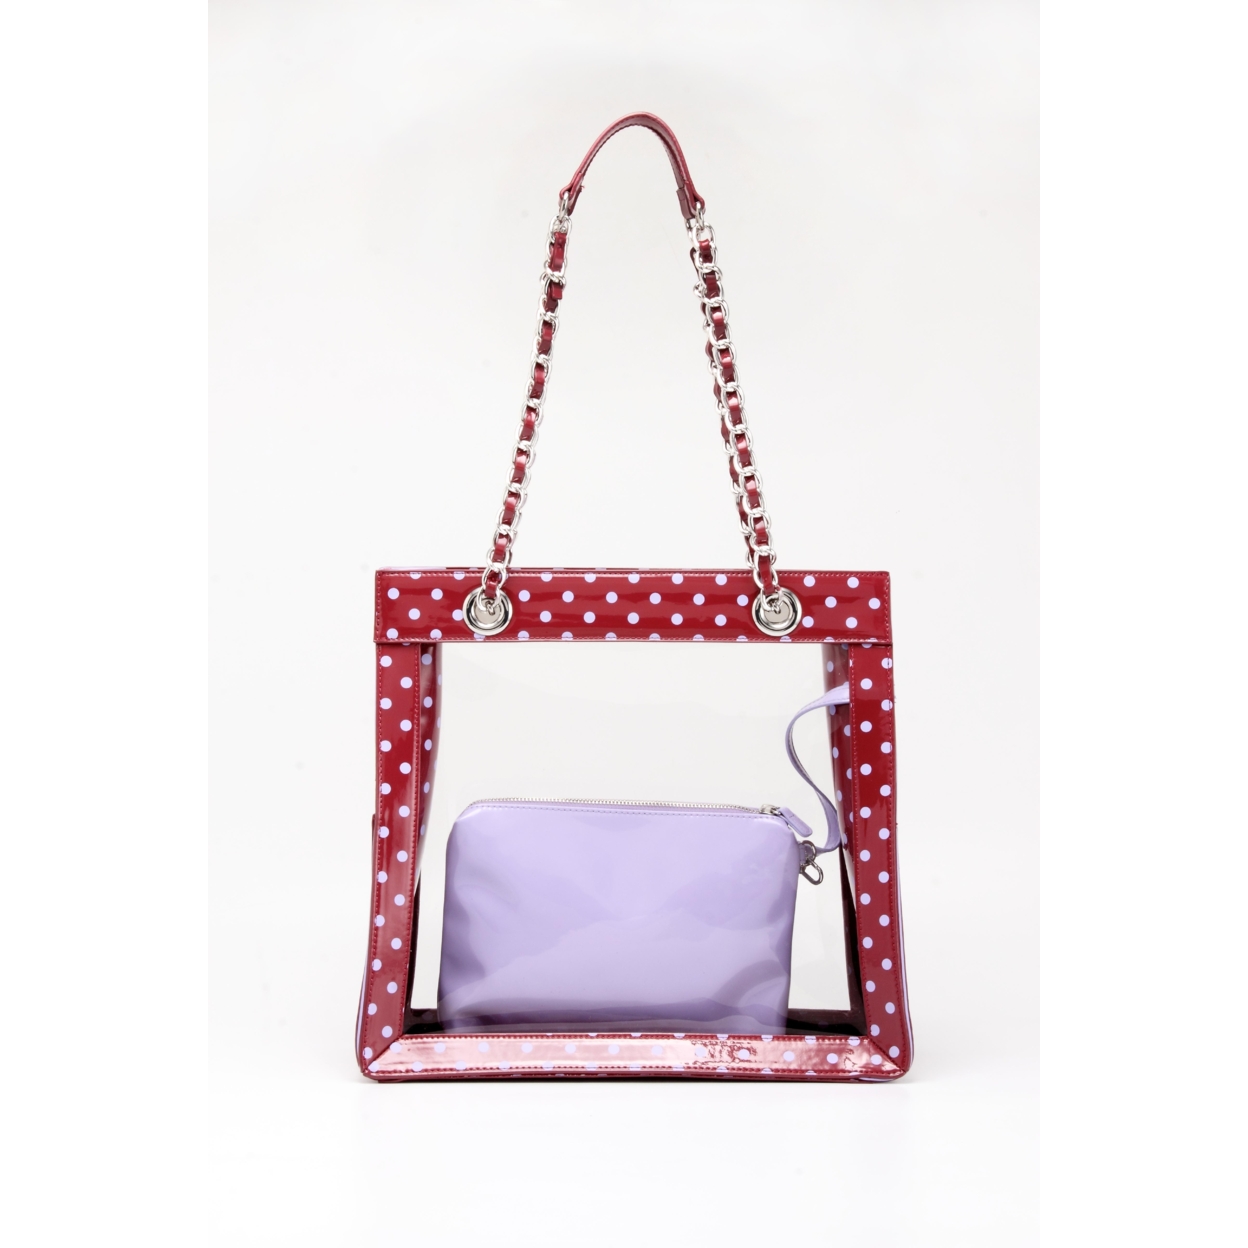 SCORE! Andrea Large Clear Designer Tote For School, Work, Travel - Maroon And Lavender